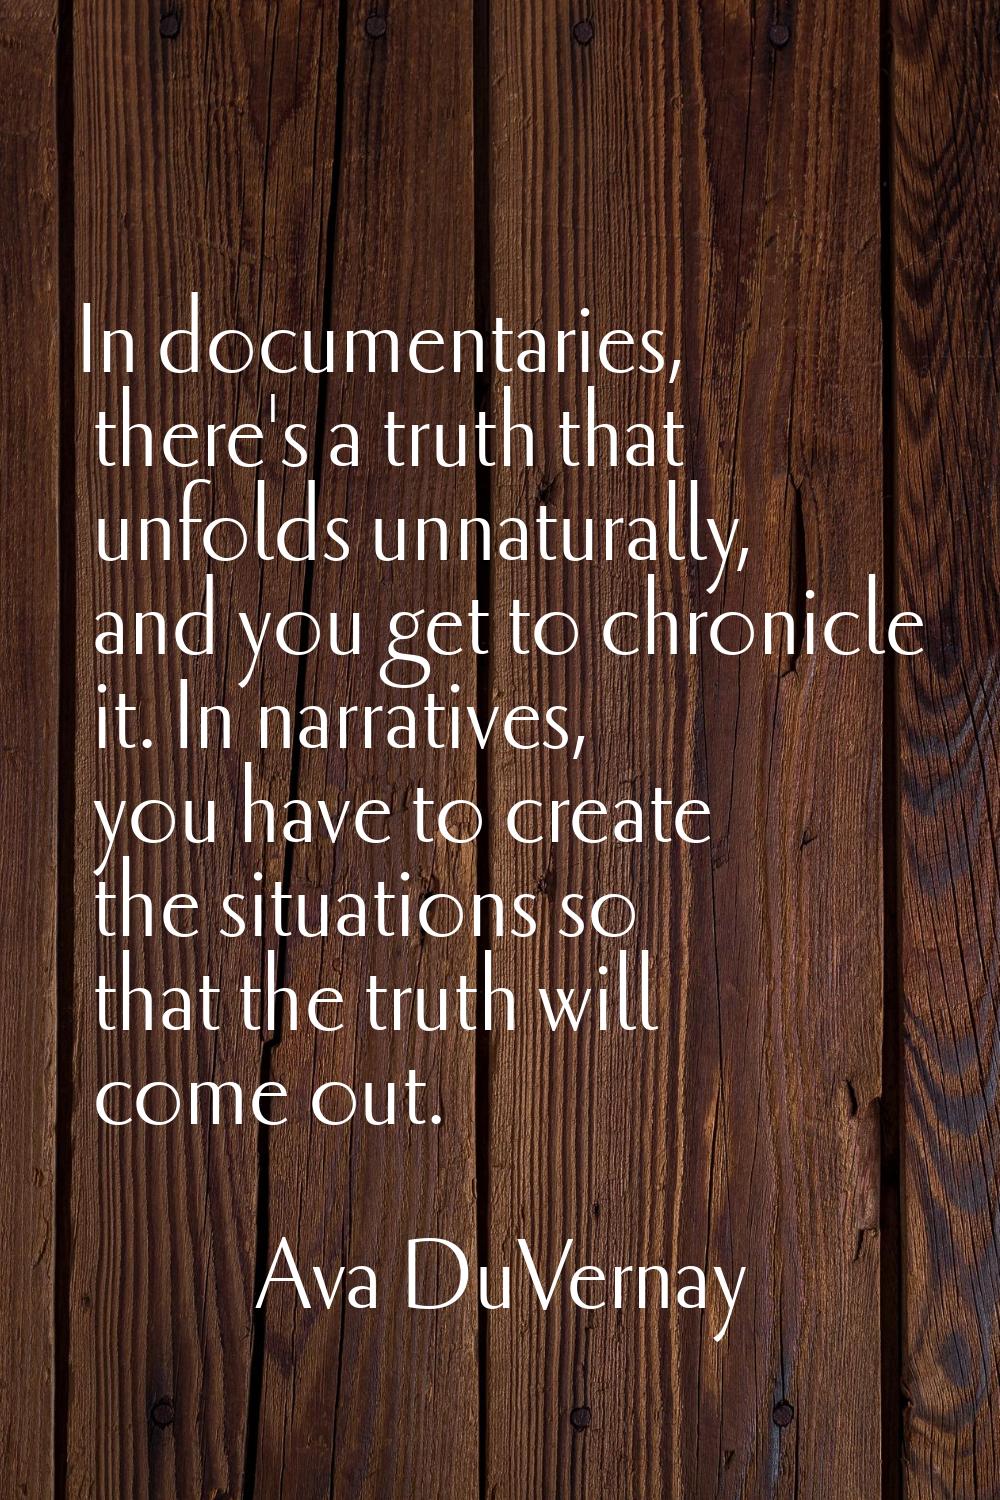 In documentaries, there's a truth that unfolds unnaturally, and you get to chronicle it. In narrati